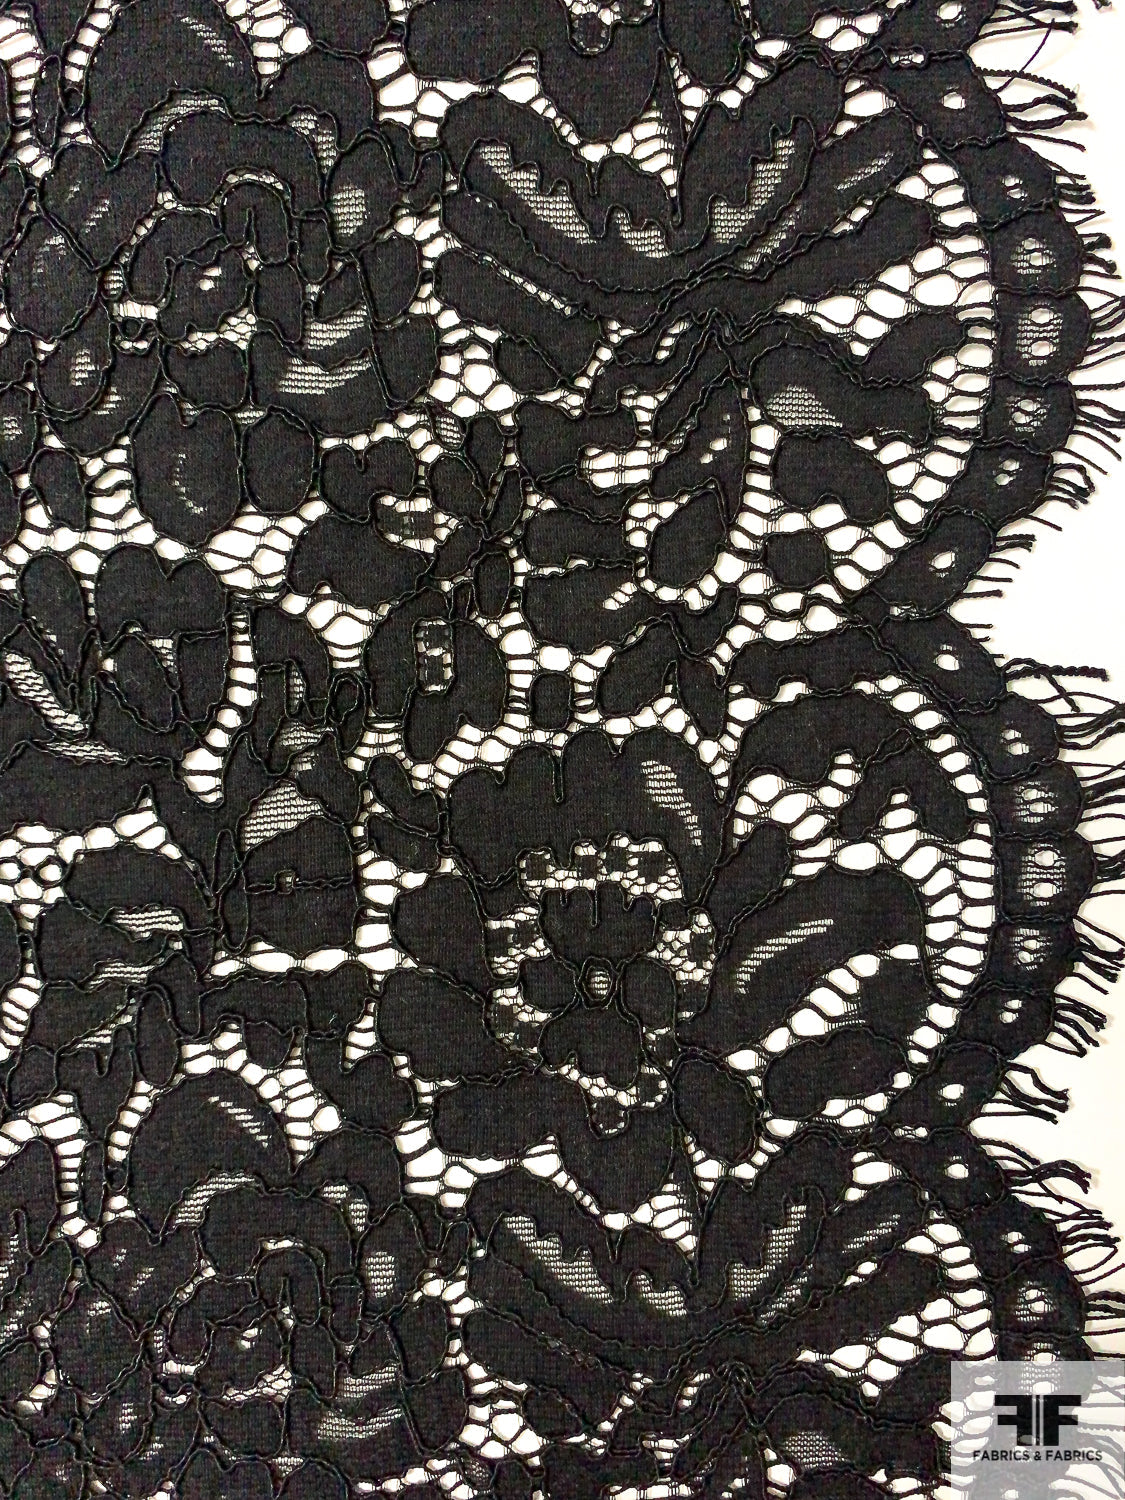 English Lace Wholesale Fabric in Black, Black Lace Fabric